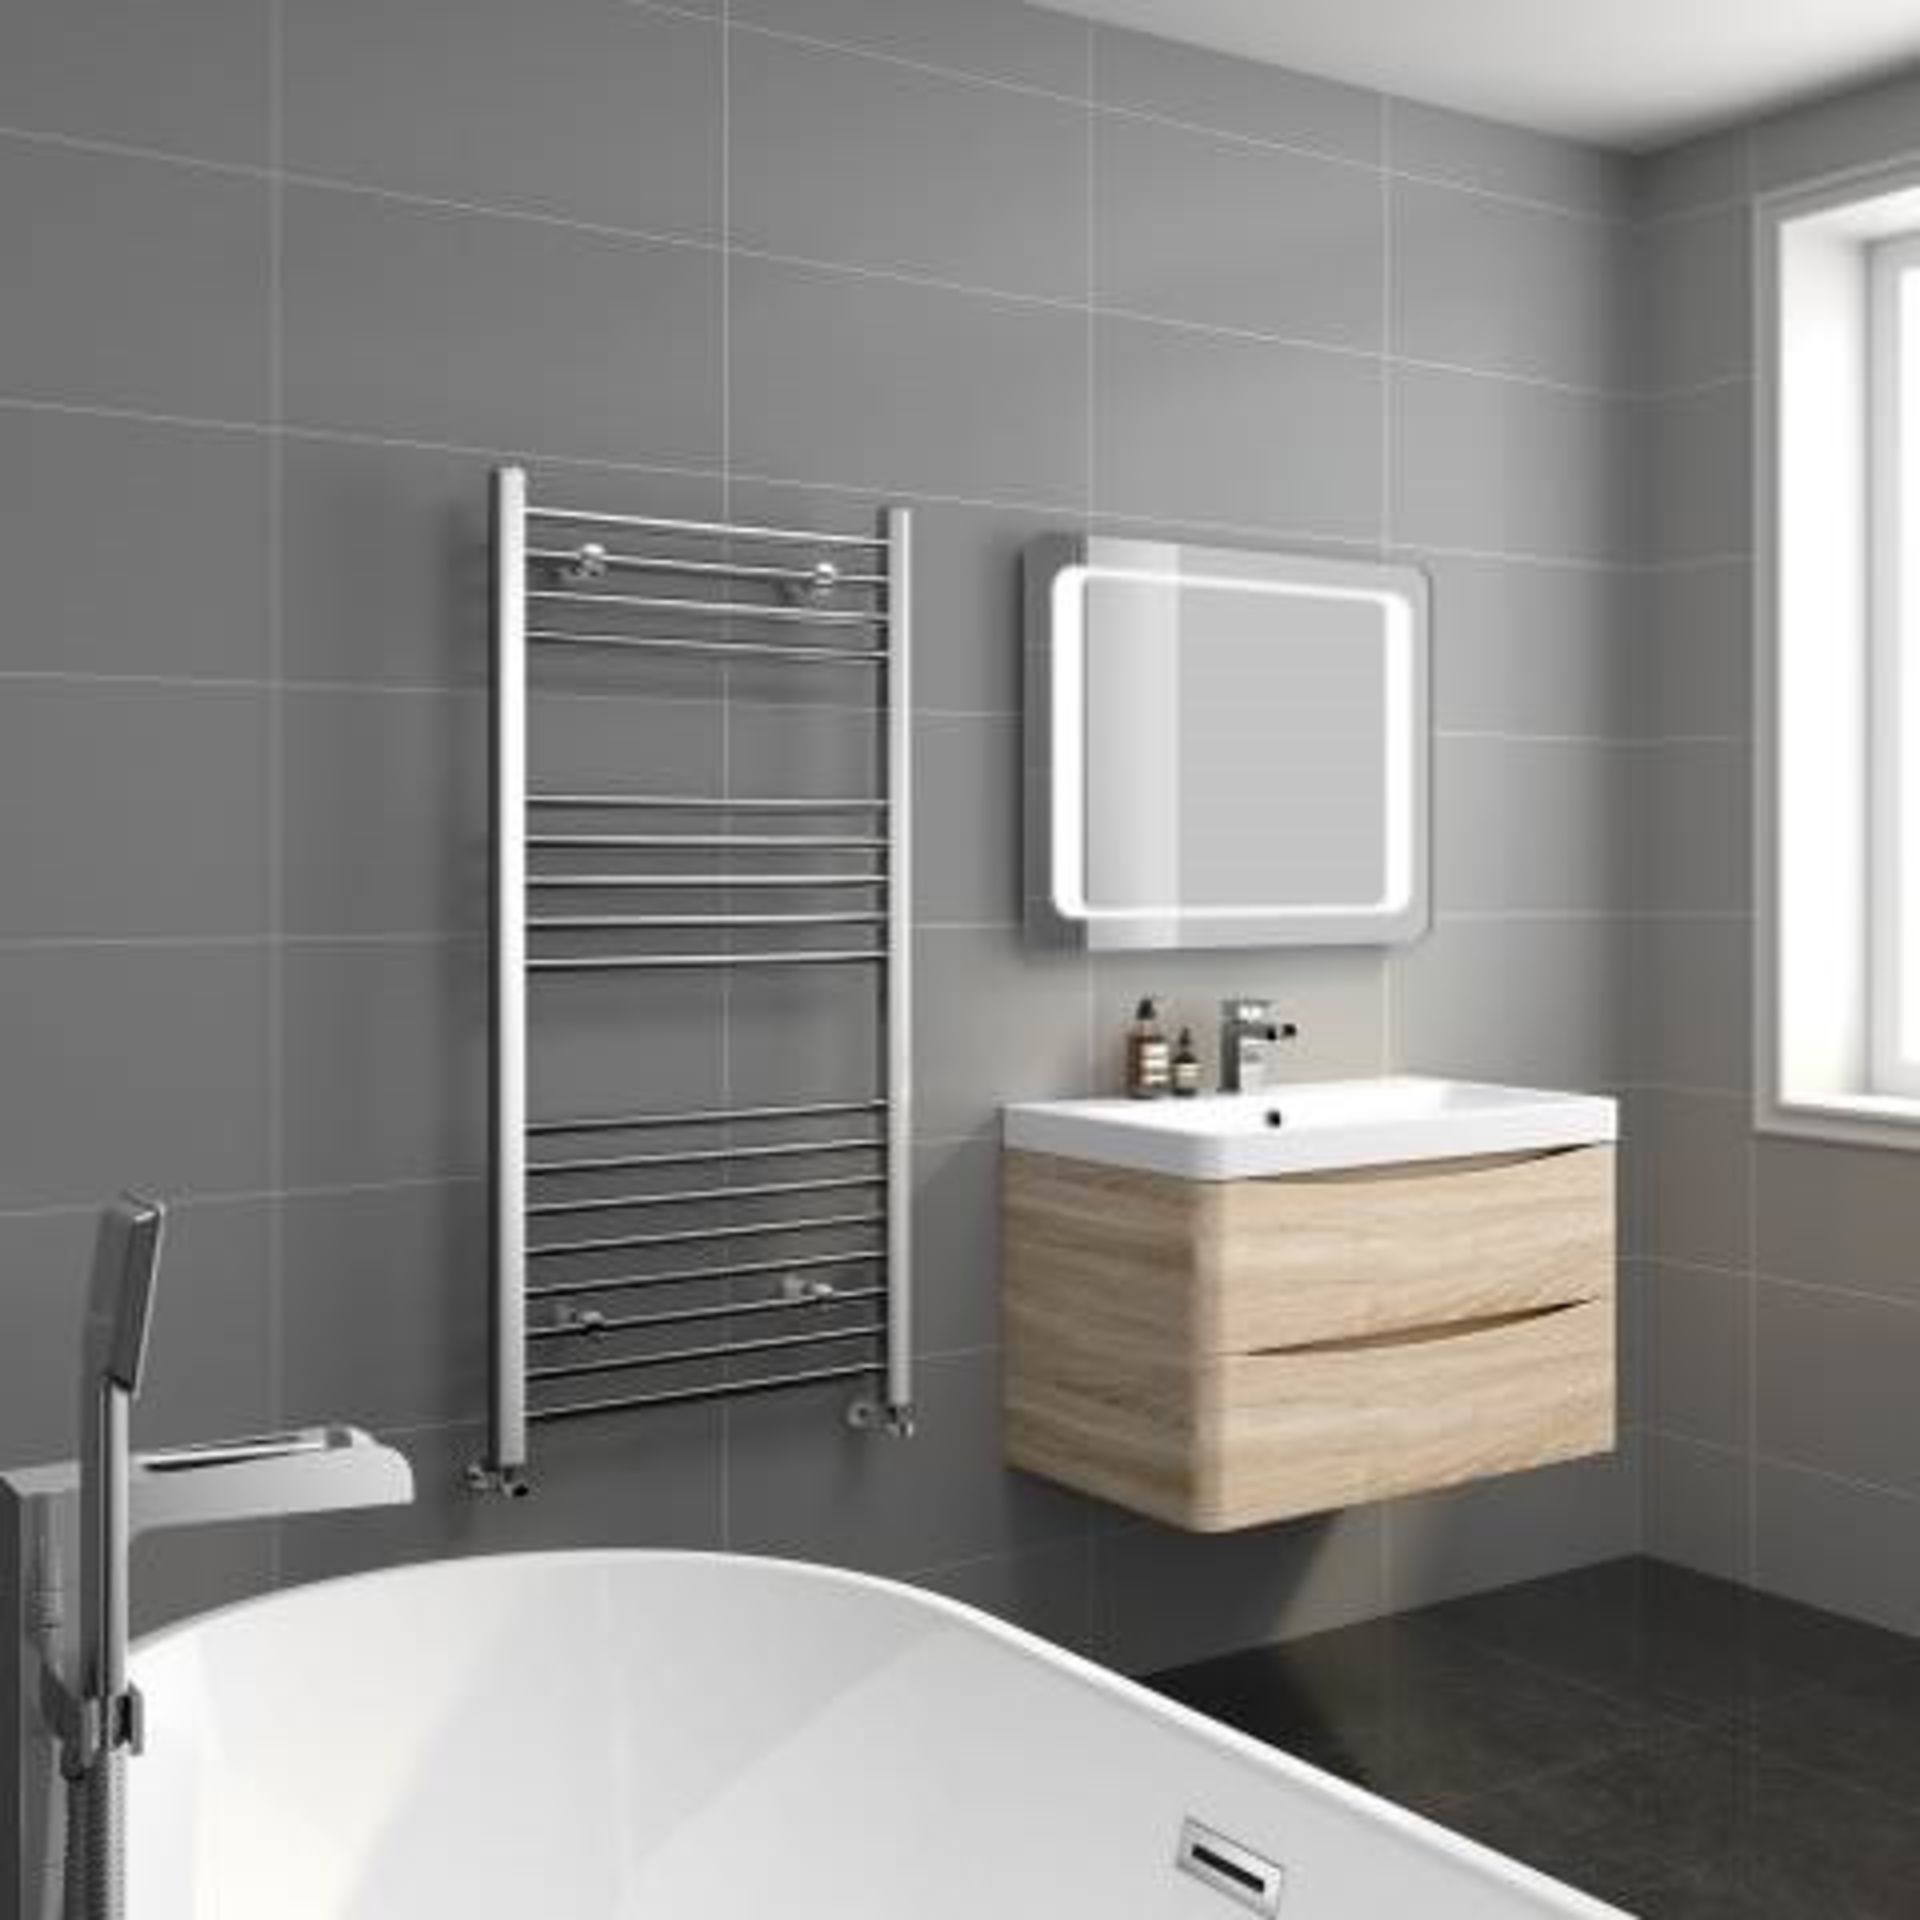 5 BRAND NEW BOXED 1200x600mm - 20mm Tubes - Chrome Heated Straight Rail Ladder Towel Radiator.RRP £ - Image 2 of 4